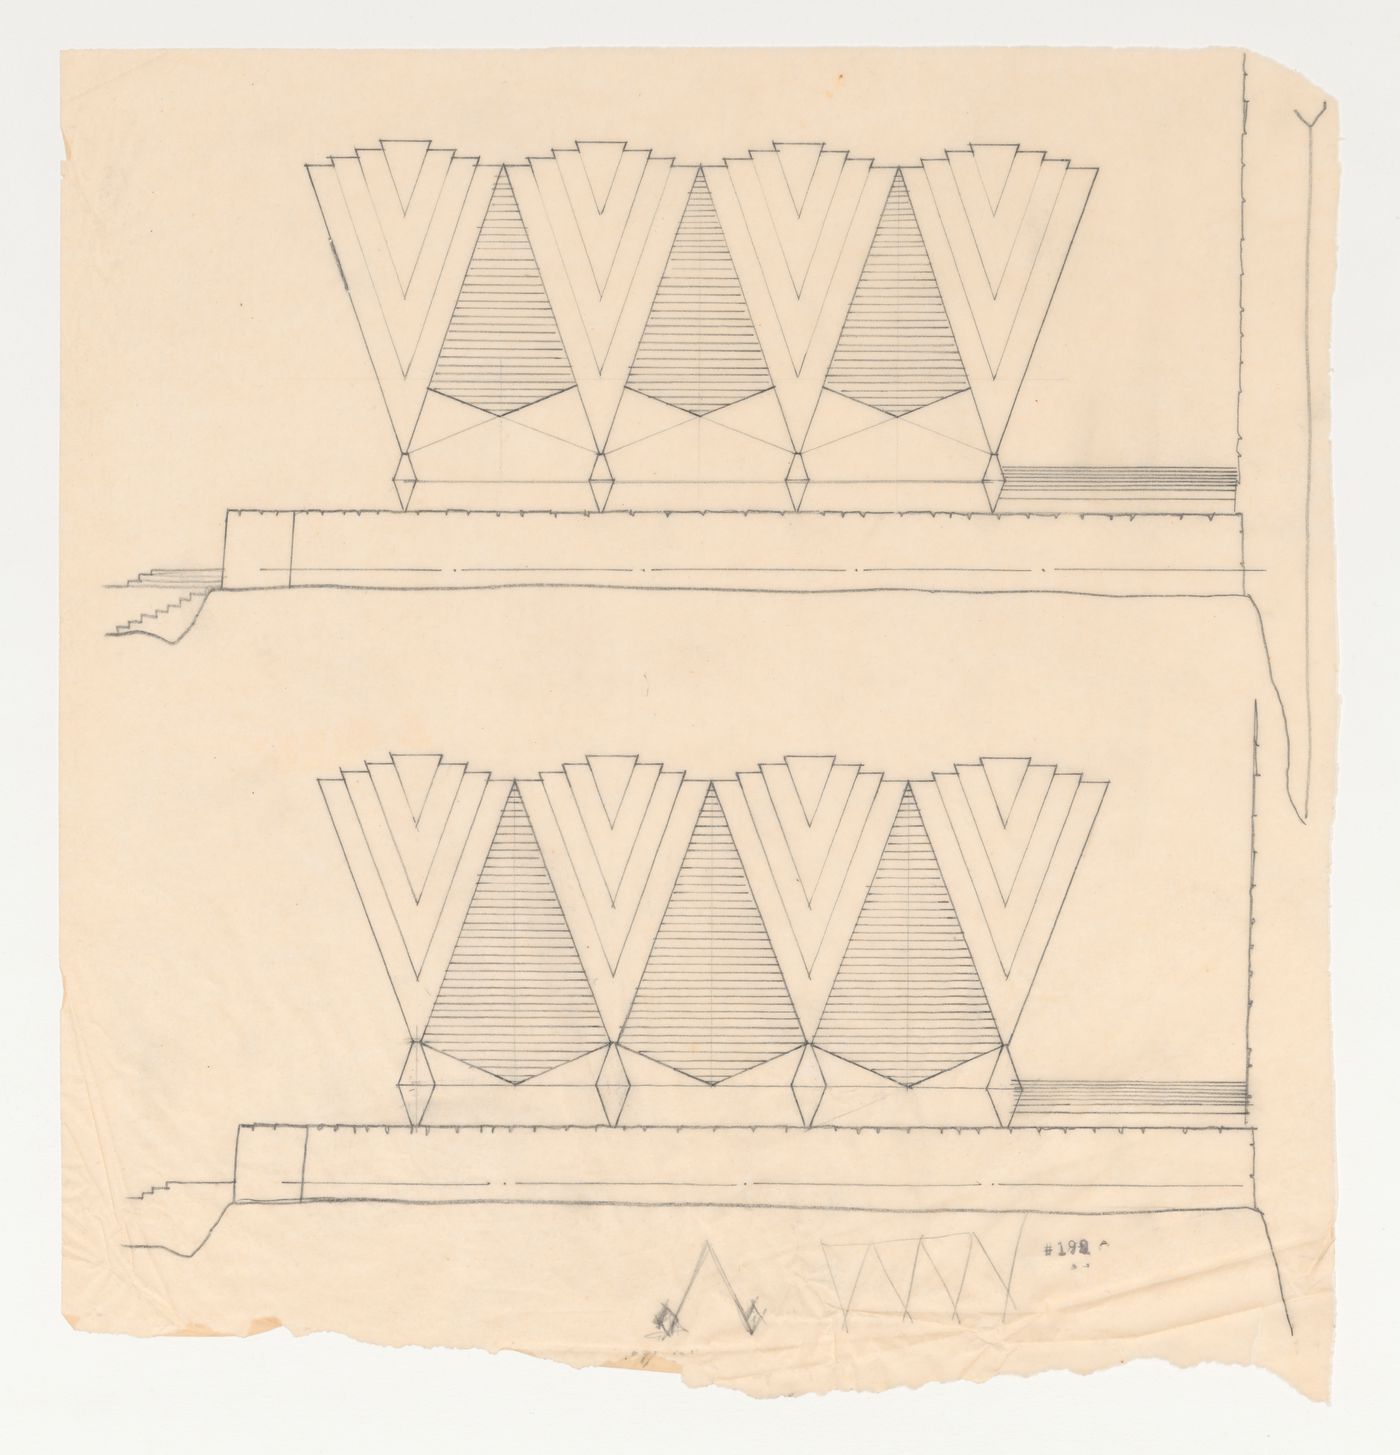 Two alternate elevations for a chapel roof canopy based on the Wayfarers' Chapel design